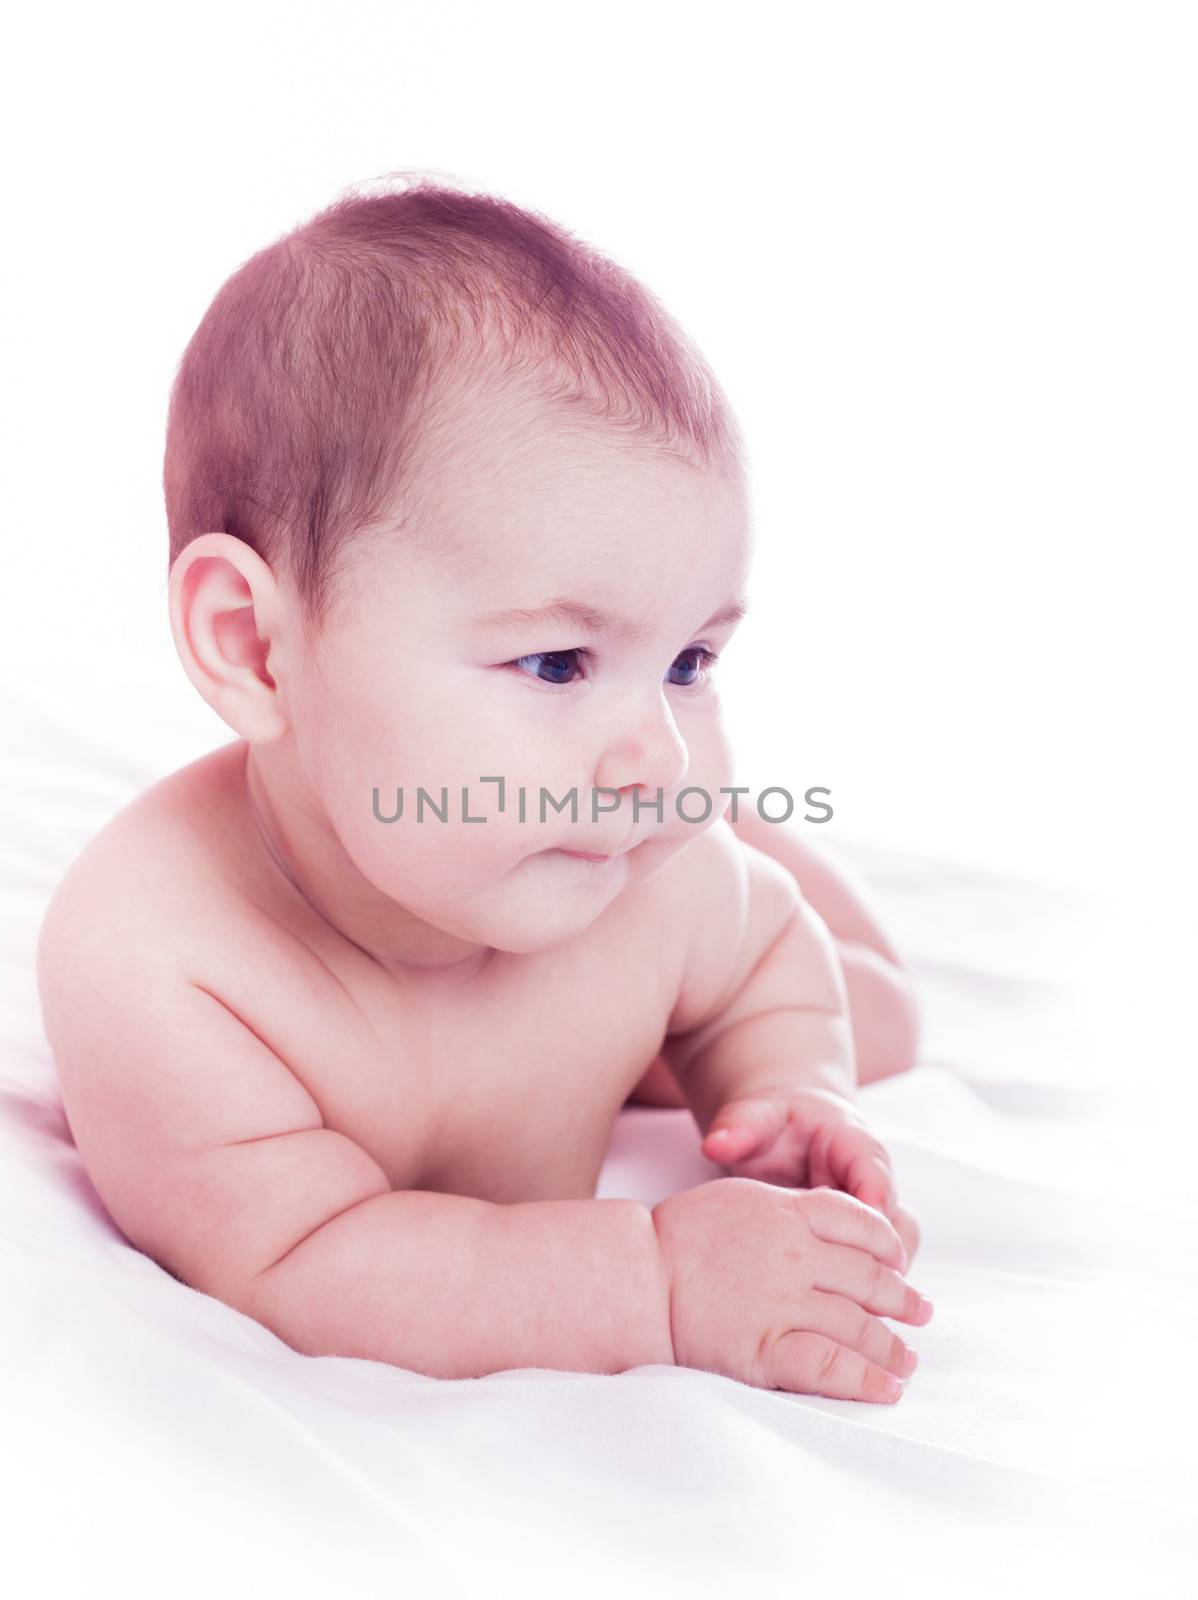 Five month old baby lie and look. Isolated on white